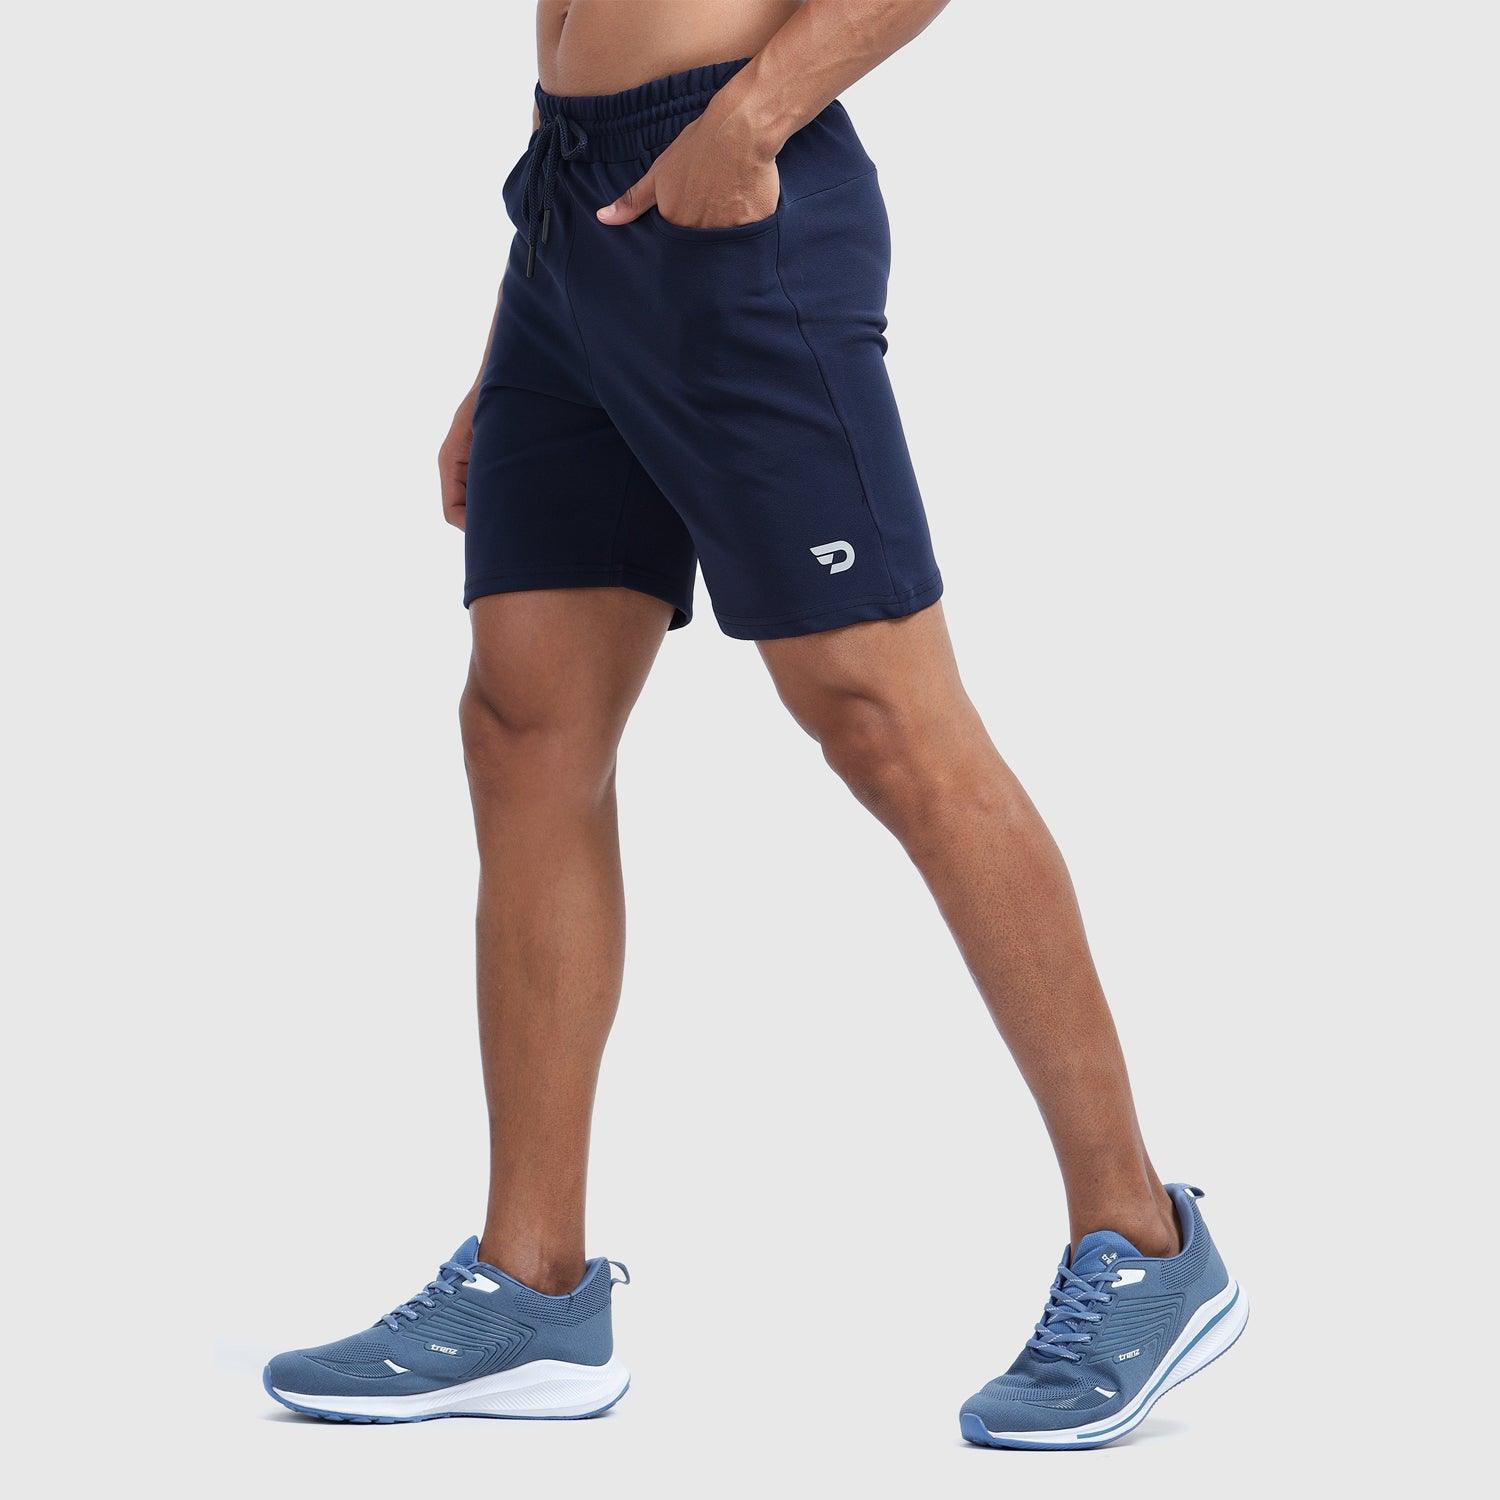 Denmonk's fashionable Retroglide Shorts midnight navy shorts for men will boost your level of gym fitness.